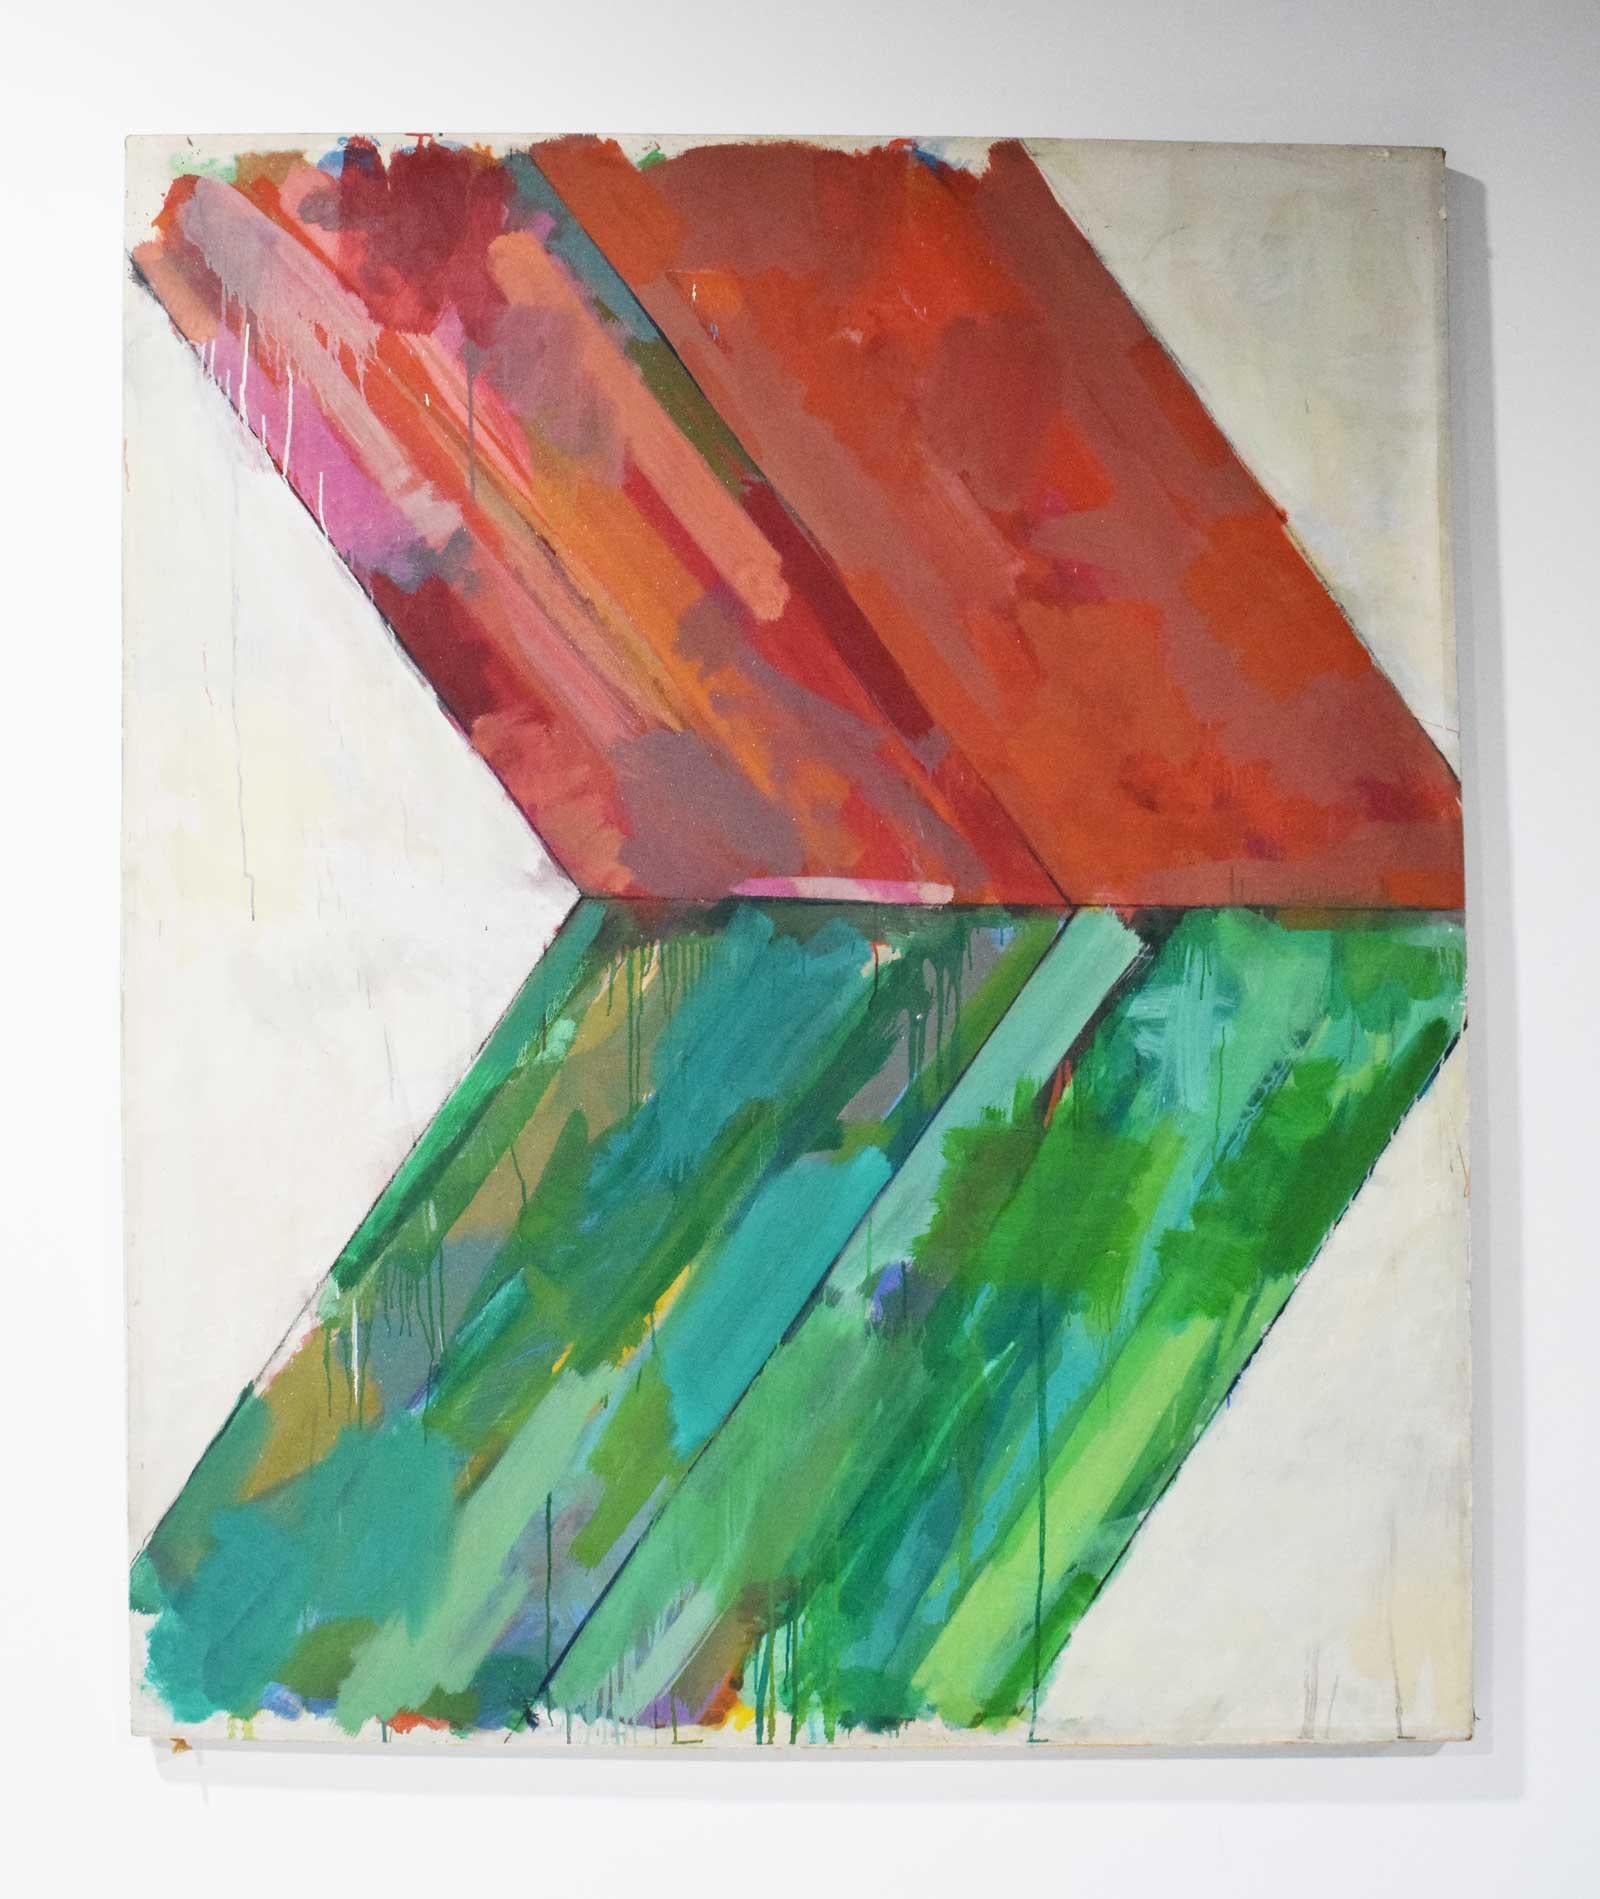 Large oil on canvas by John Simpson, dated 1964. Exhibited at the Brooklyn Museum of Art. Ellsworth Kelly style geometric with vibrant reds and greens.